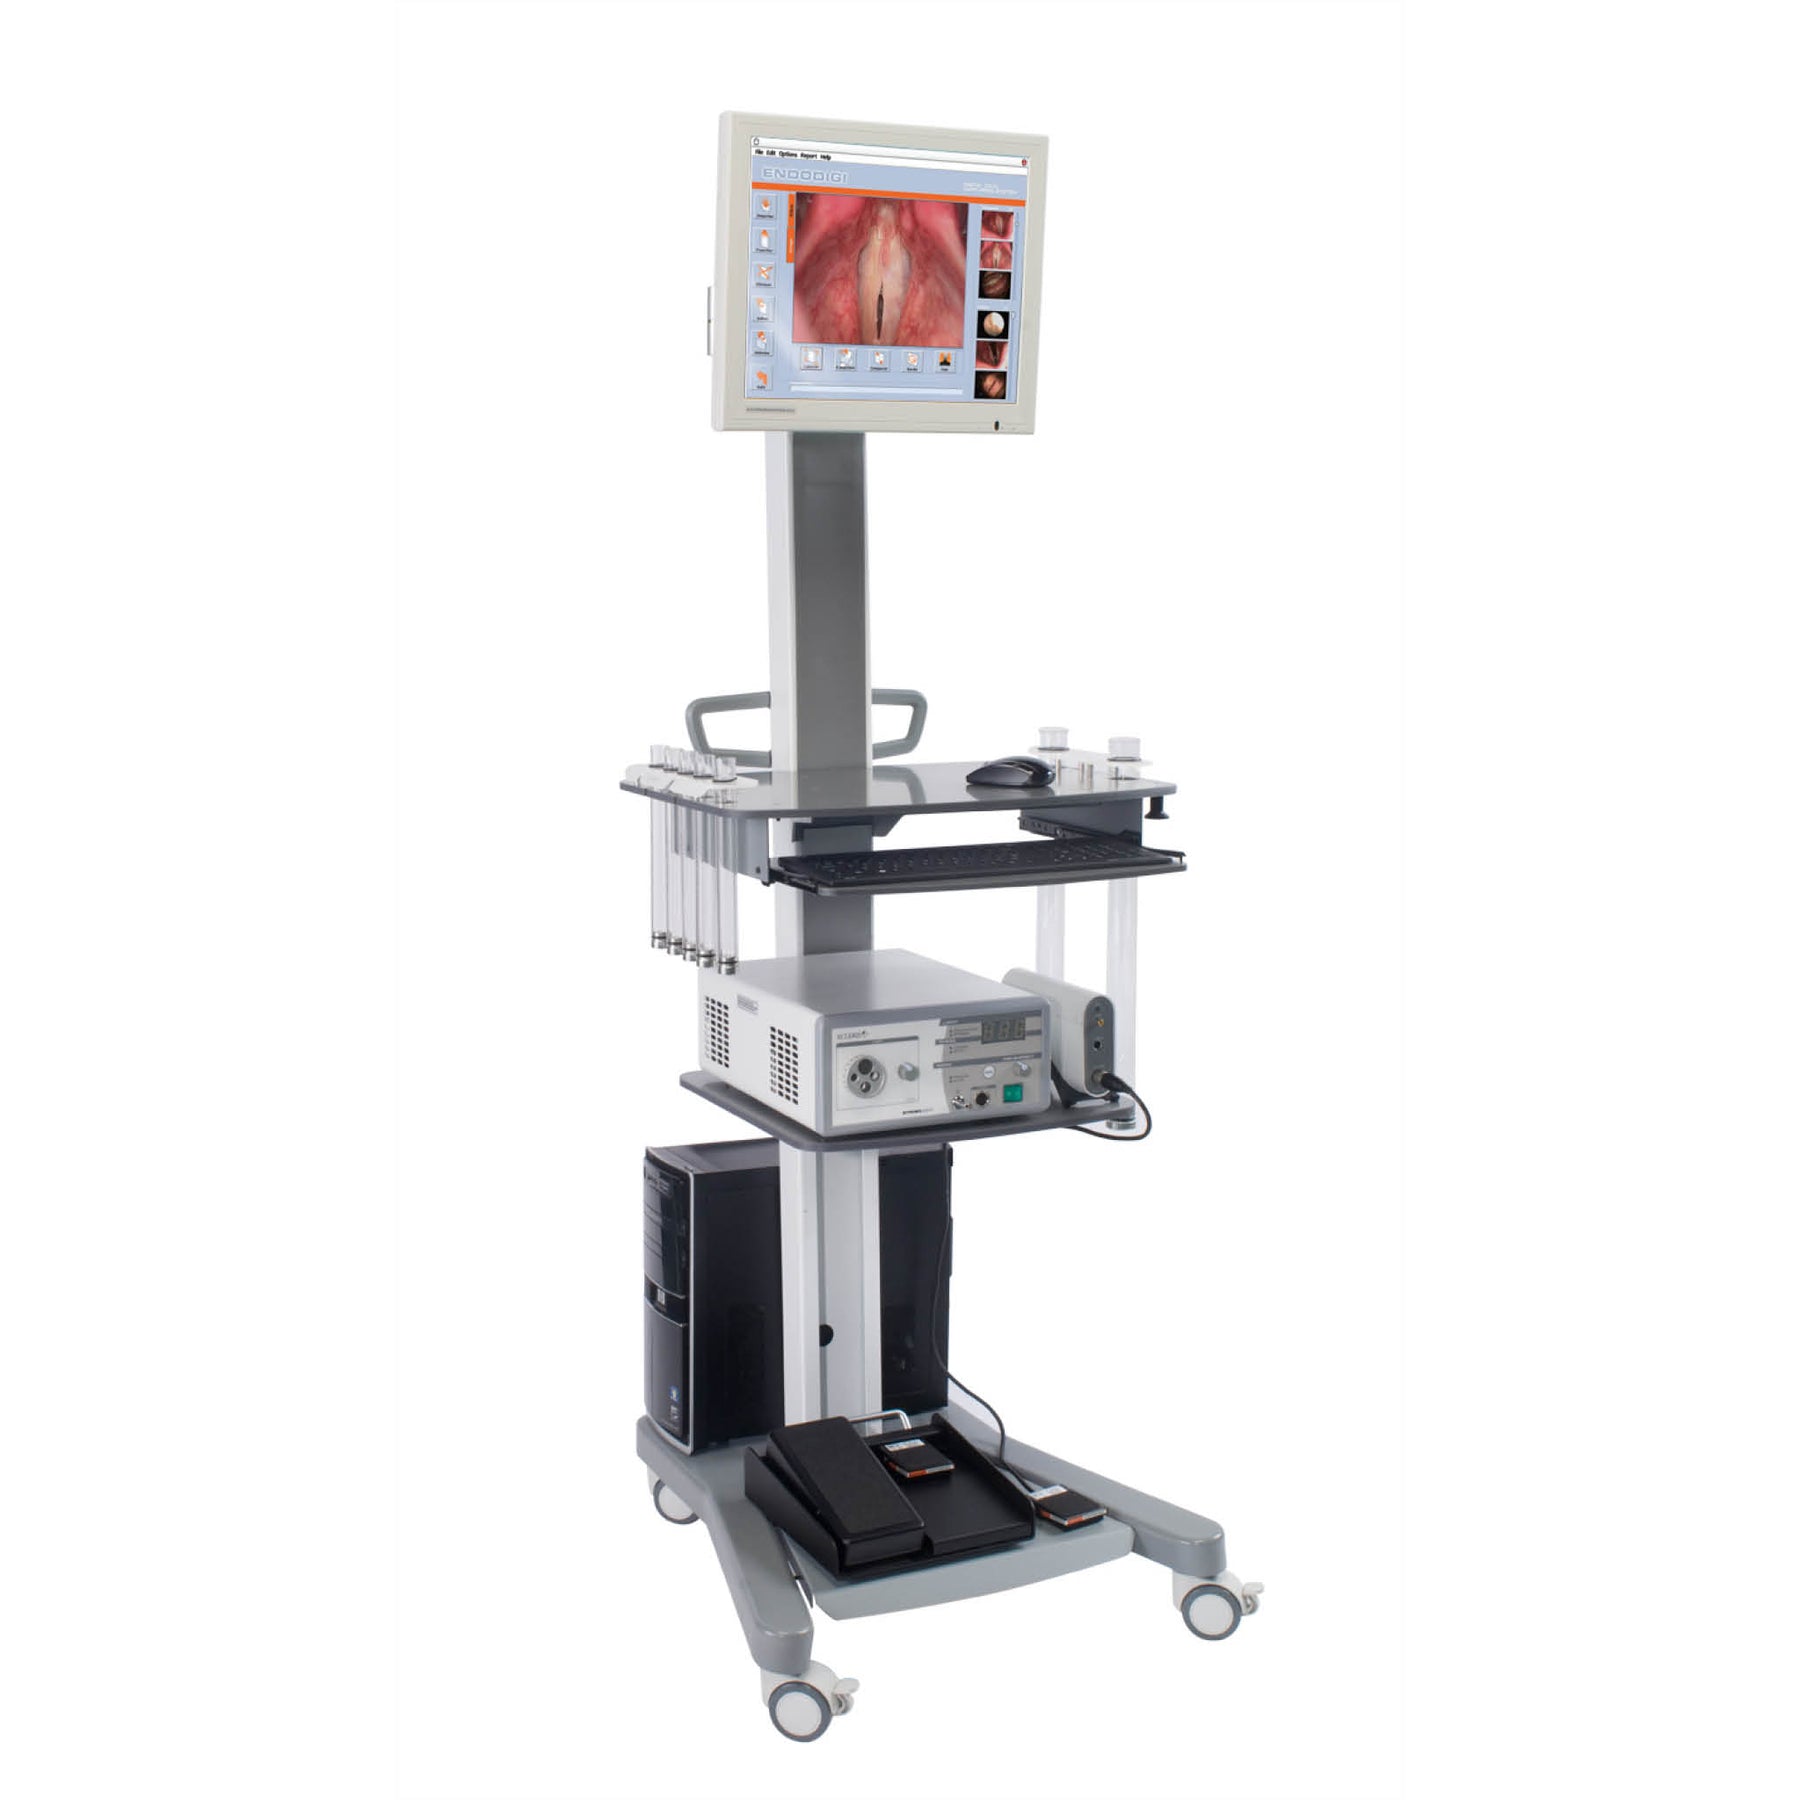 The Ecleris Equipment Cart has been designed for constant use in clinics and hospitals